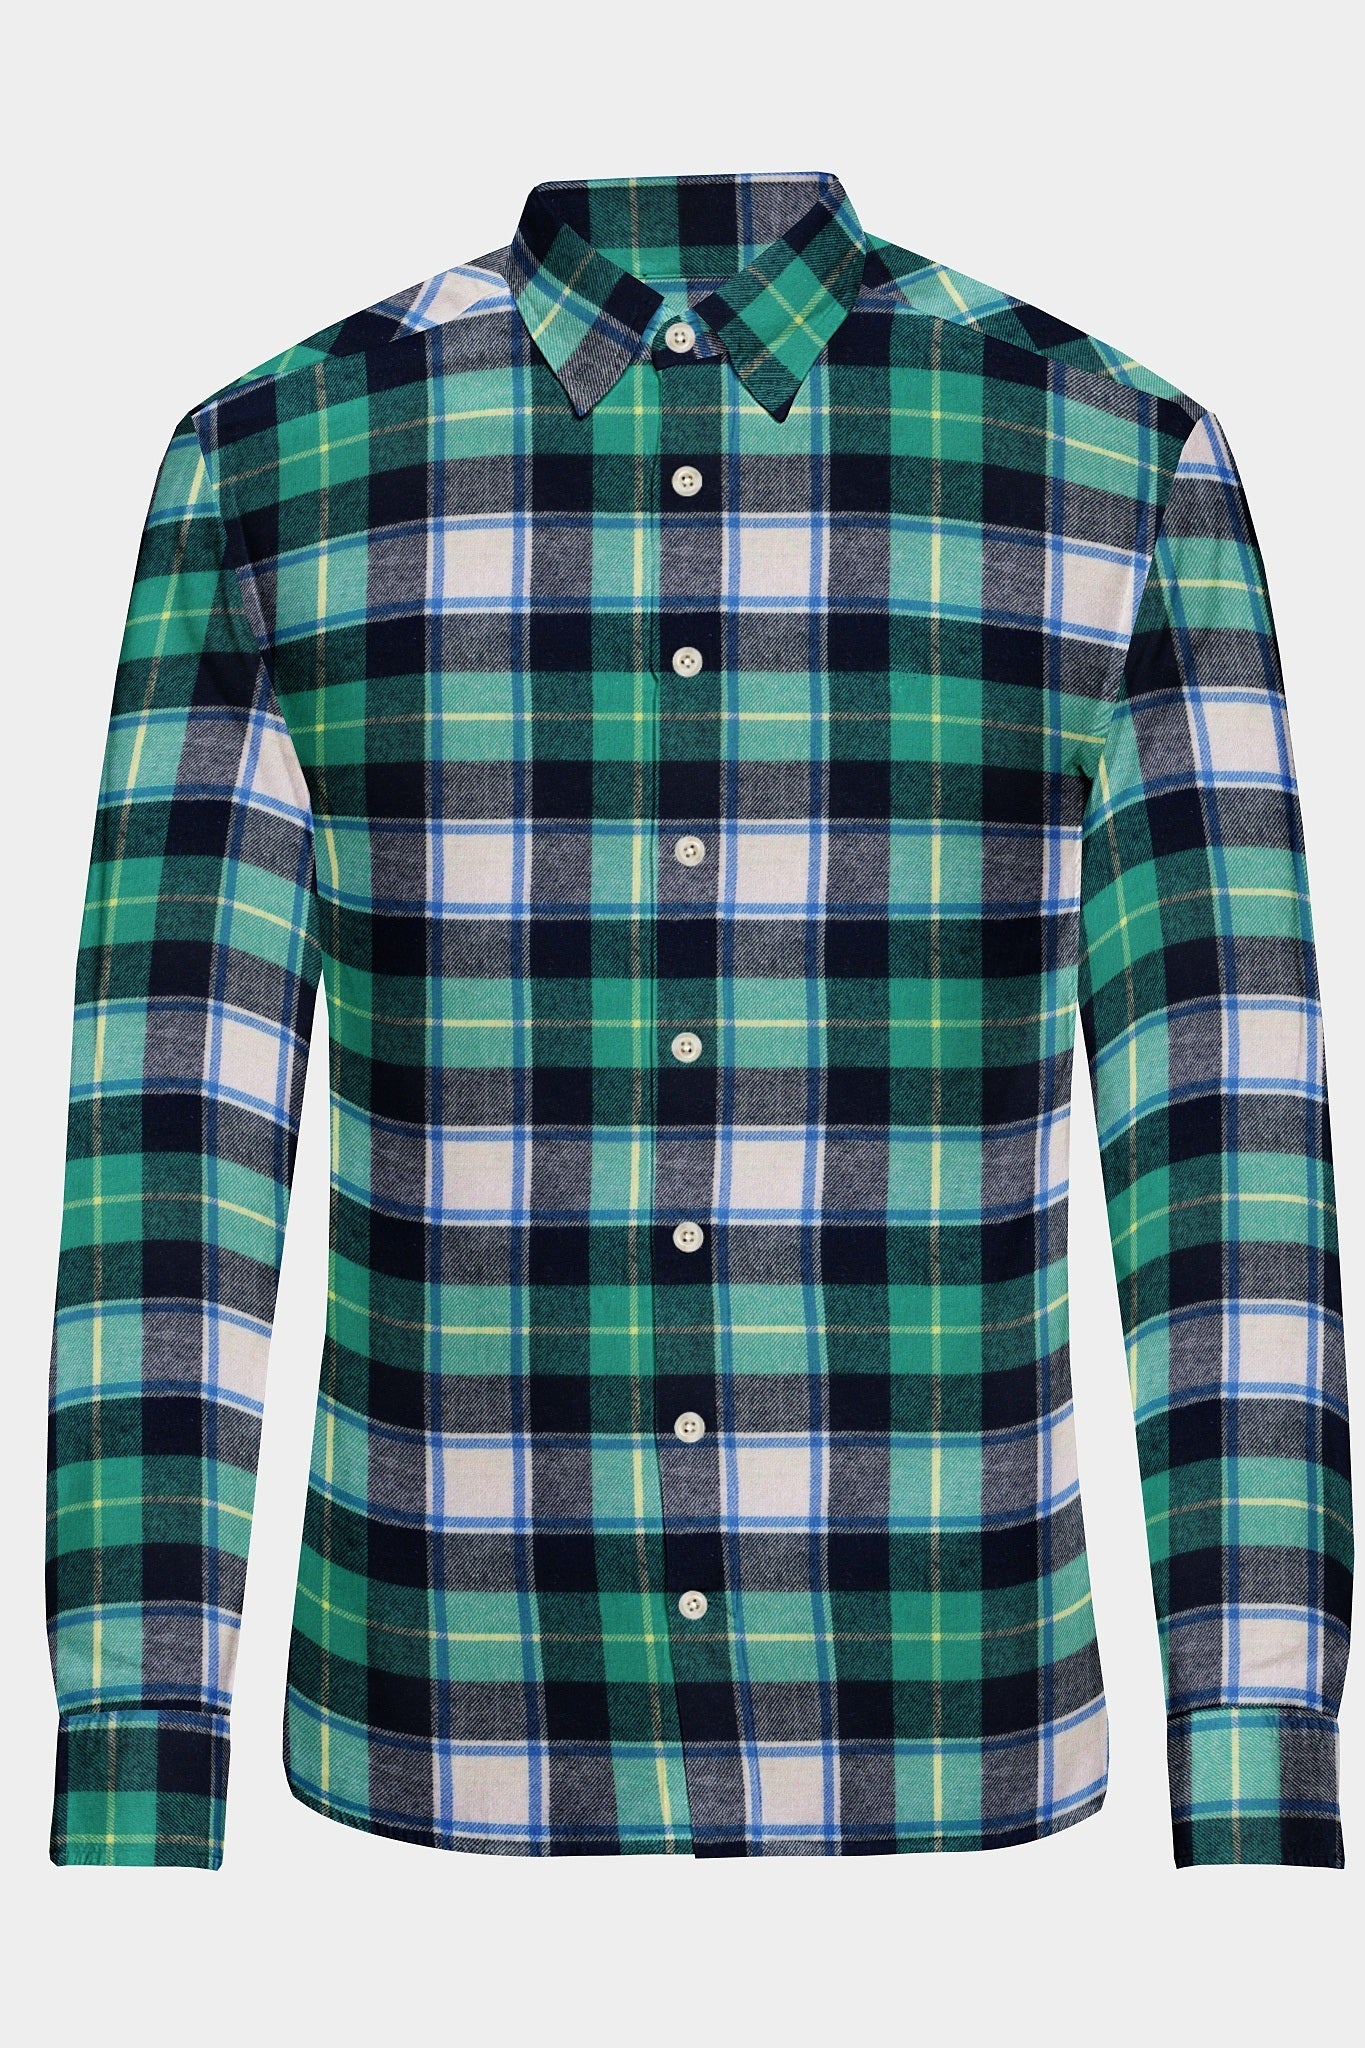 Turquoise Blue with Black and White Checked Organic Cotton Flannel Shirt